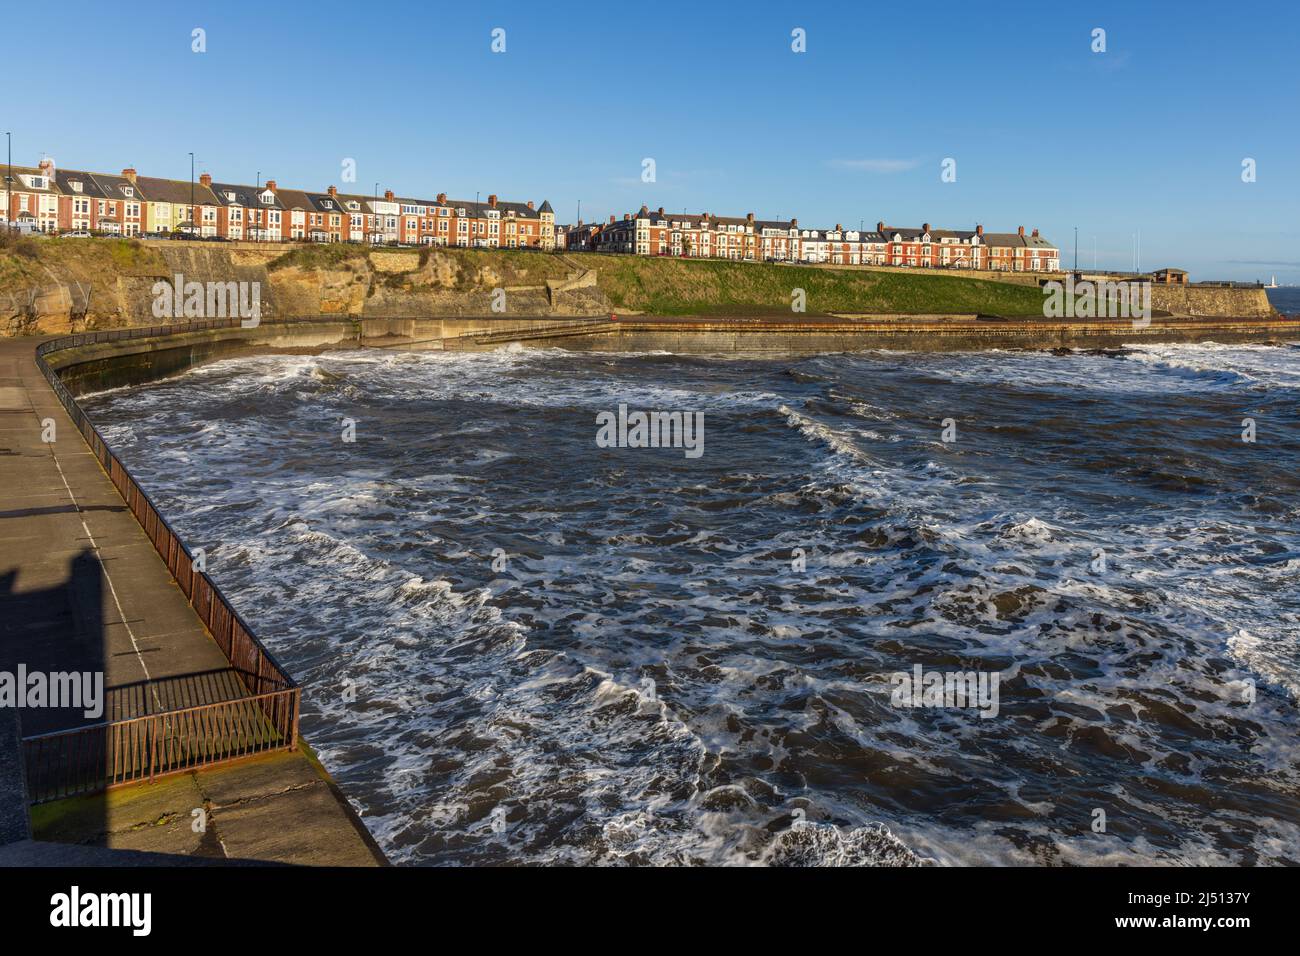 High tide at Brown's Bay, a small bay between located between the bays of Whitley Bay and Cullercoats, North Tyneside. Stock Photo